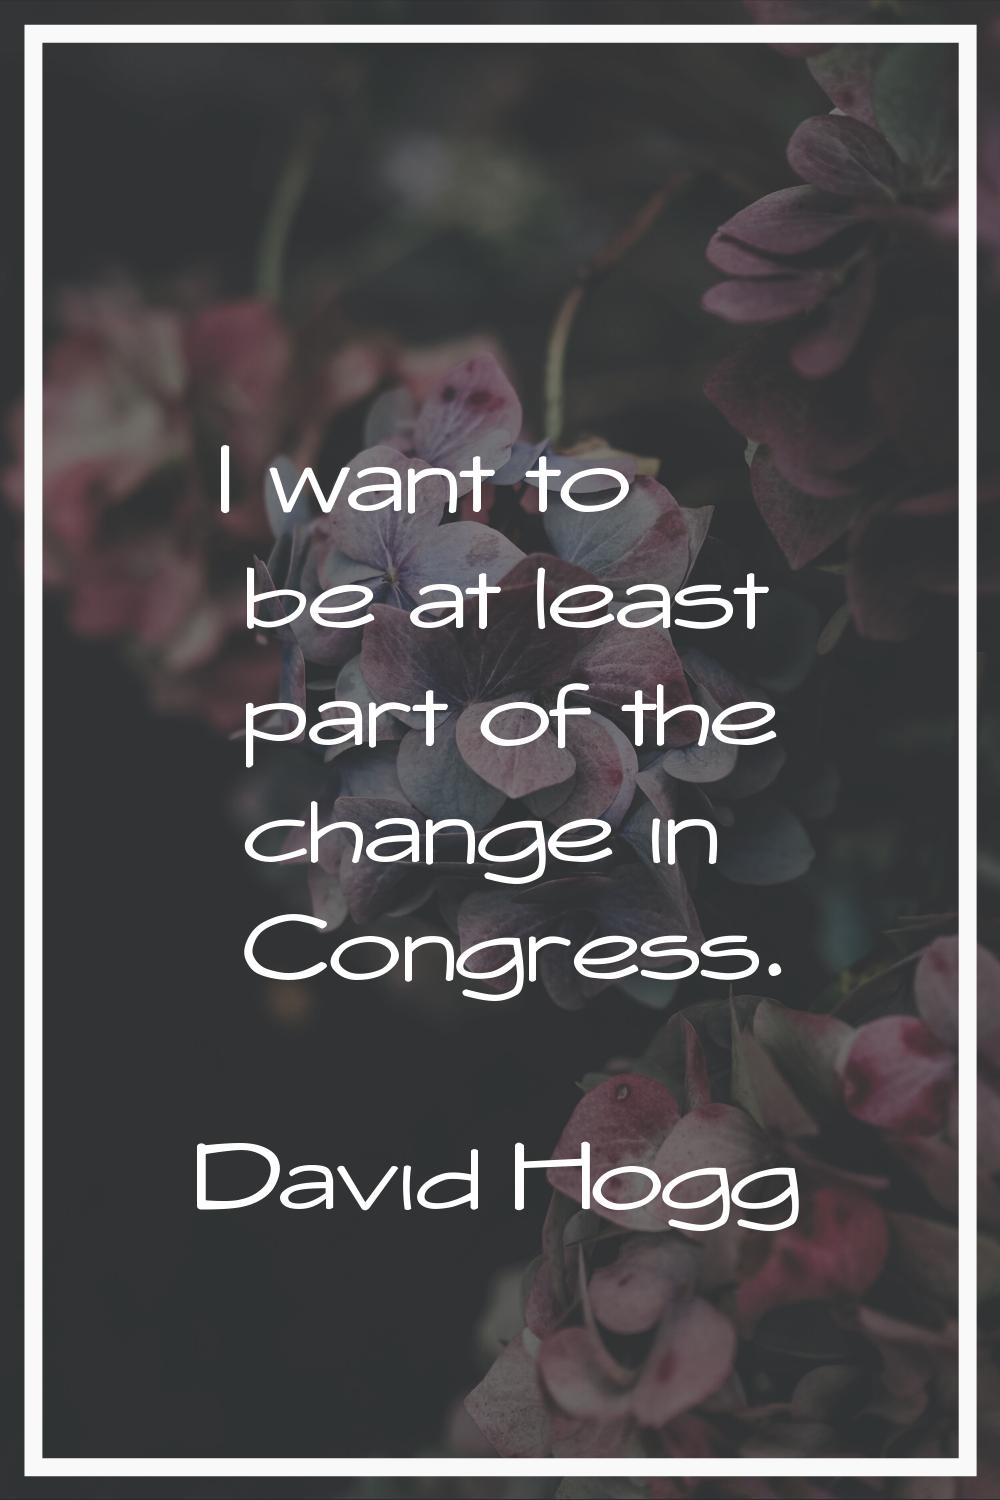 I want to be at least part of the change in Congress.